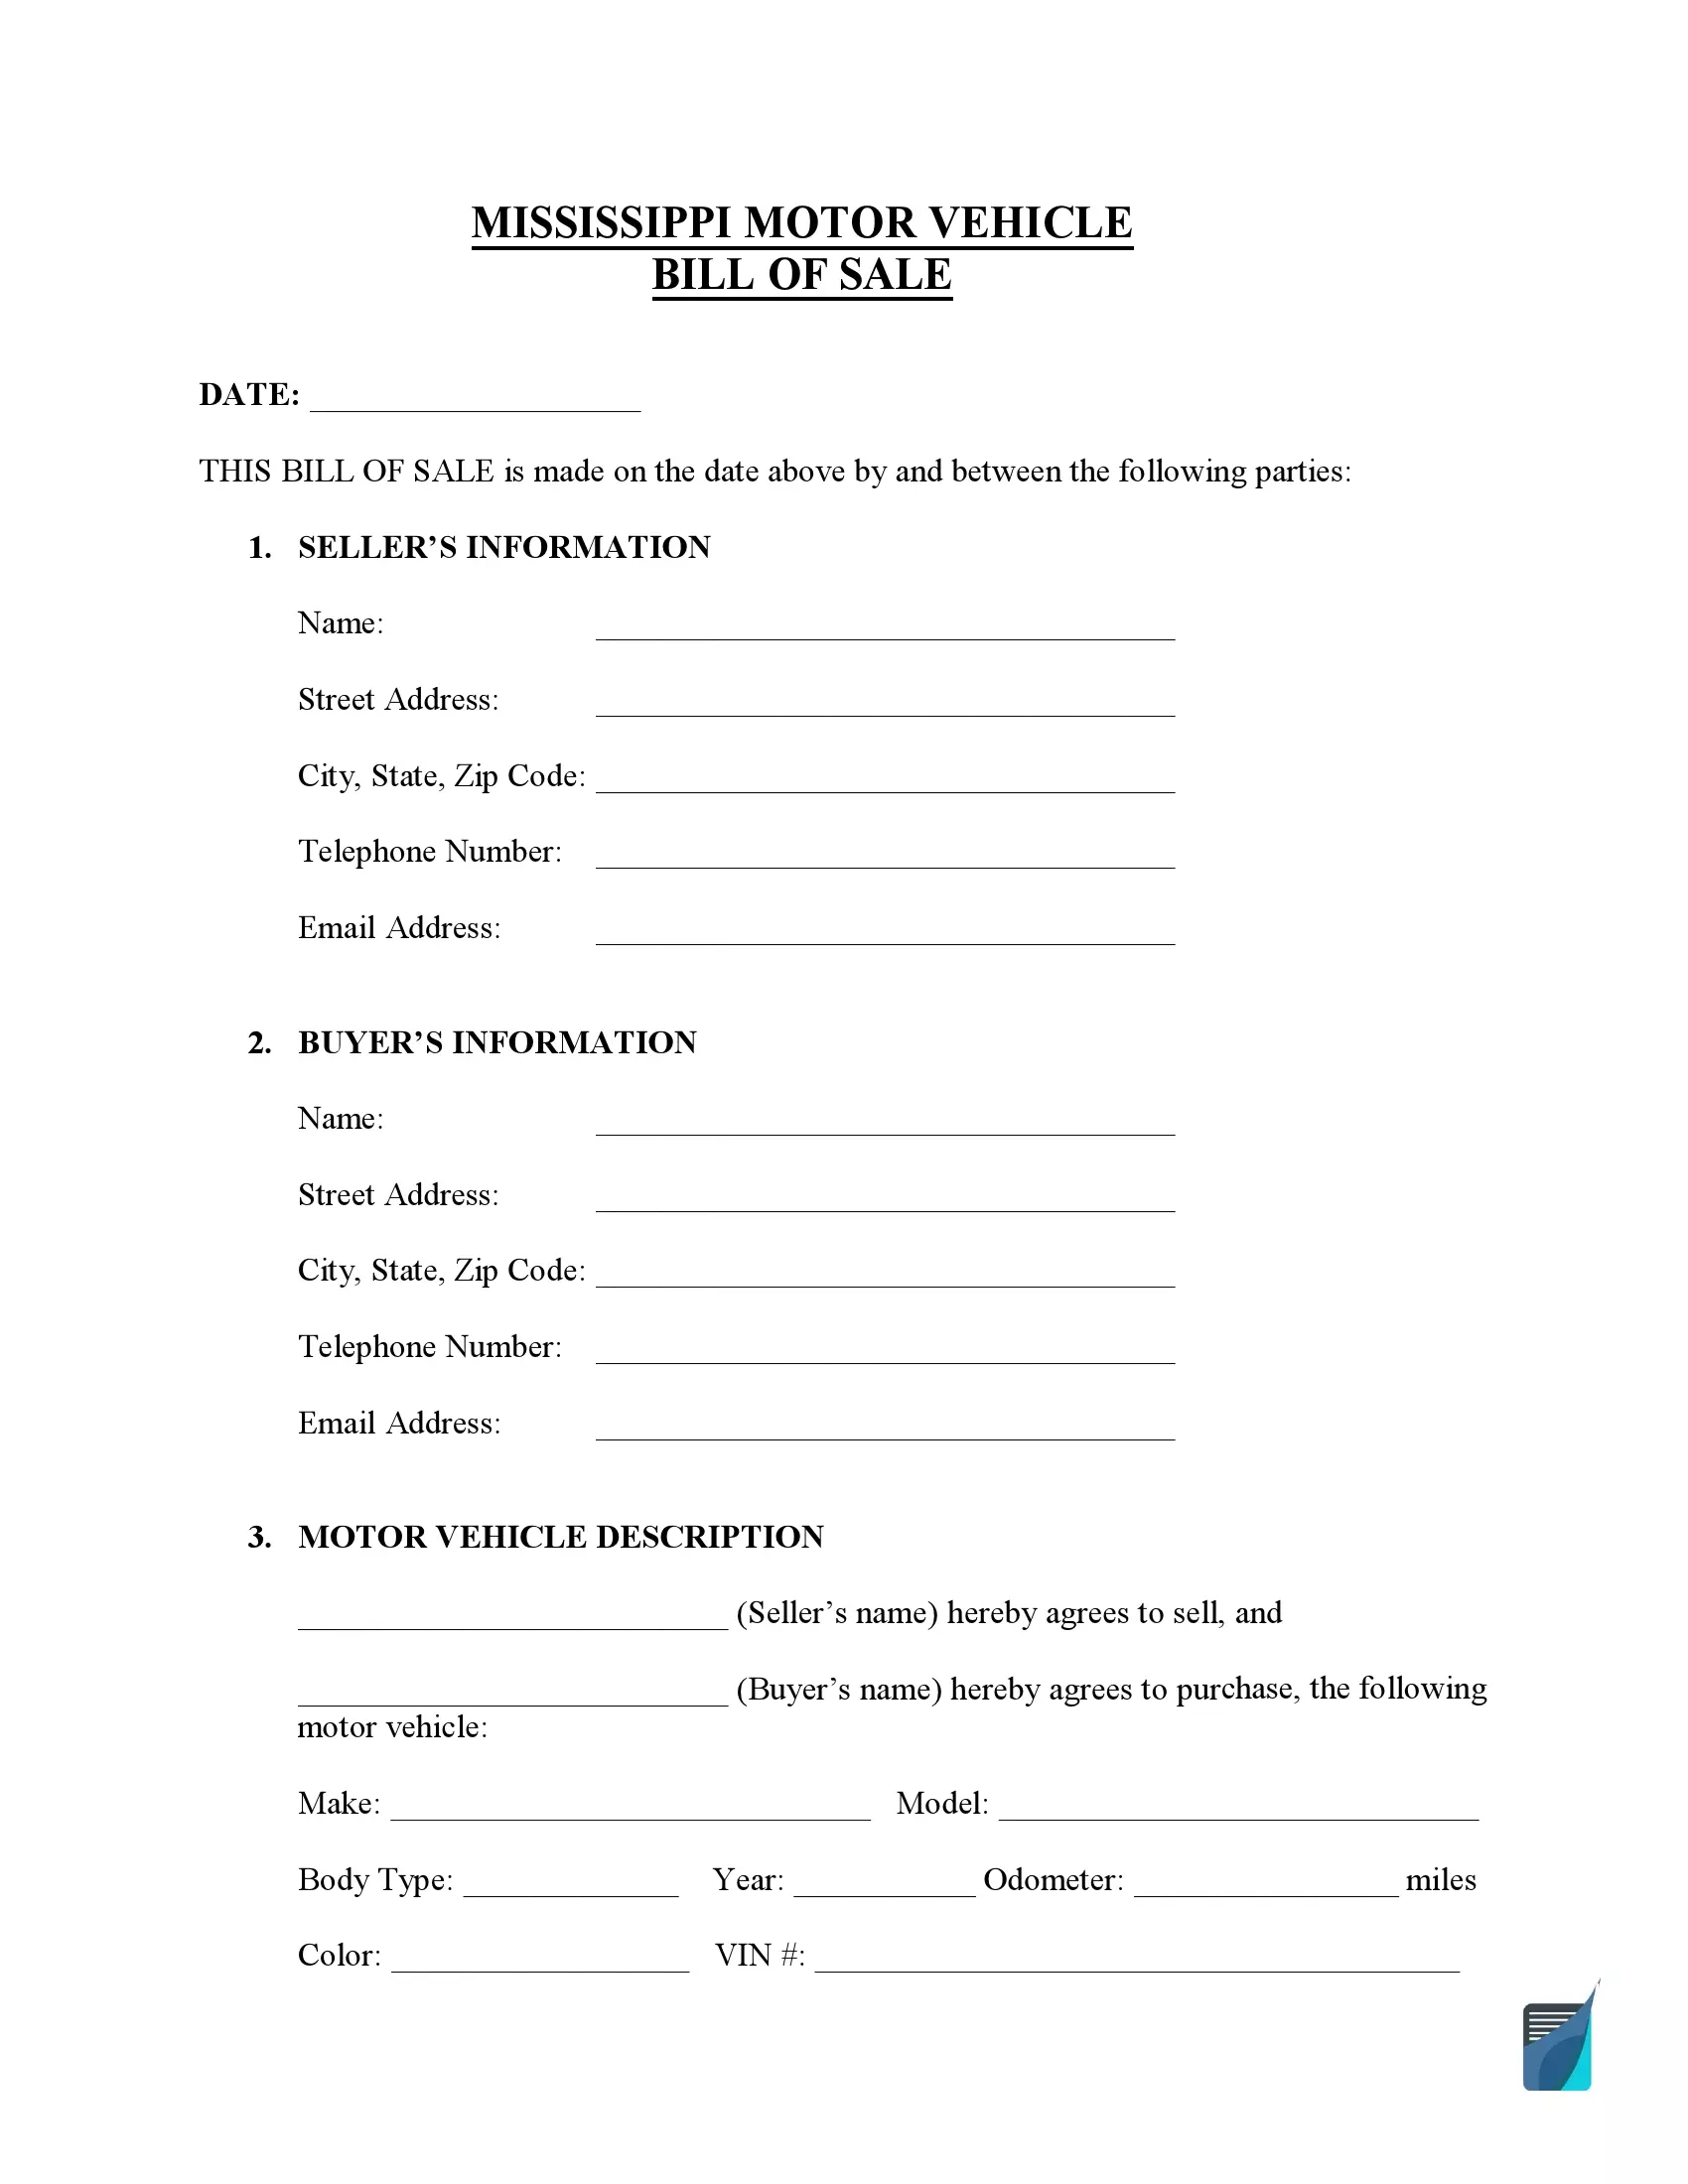 Mississippi motor vehicle bill of sale template